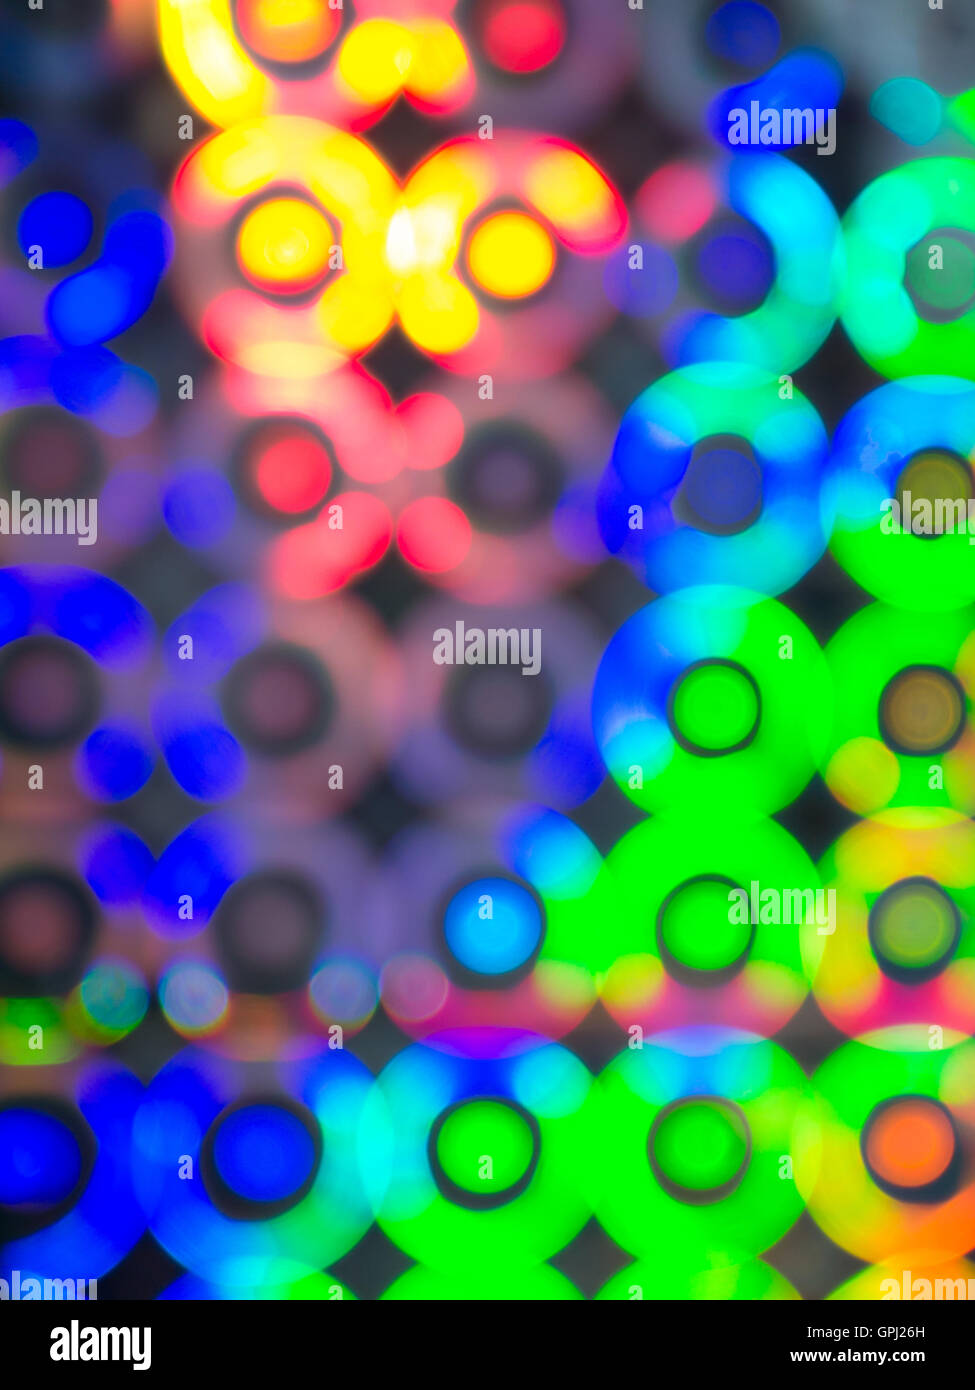 Green, blue, red, yellow, blurred circle lights background Stock Photo